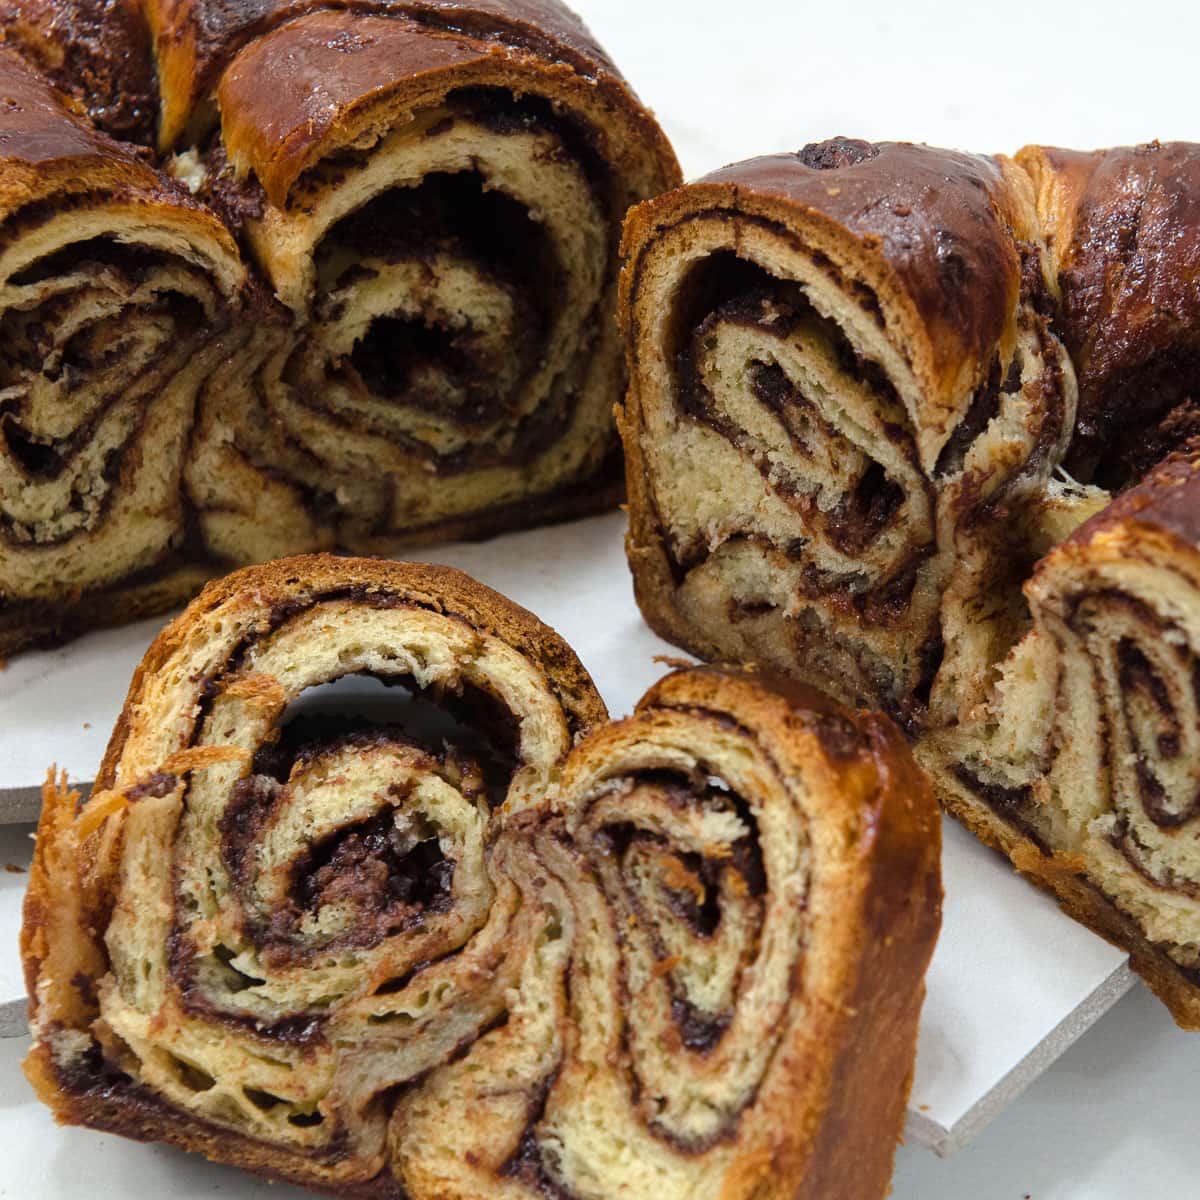 A slice of Babka swirled with a chocolate nutella filling.